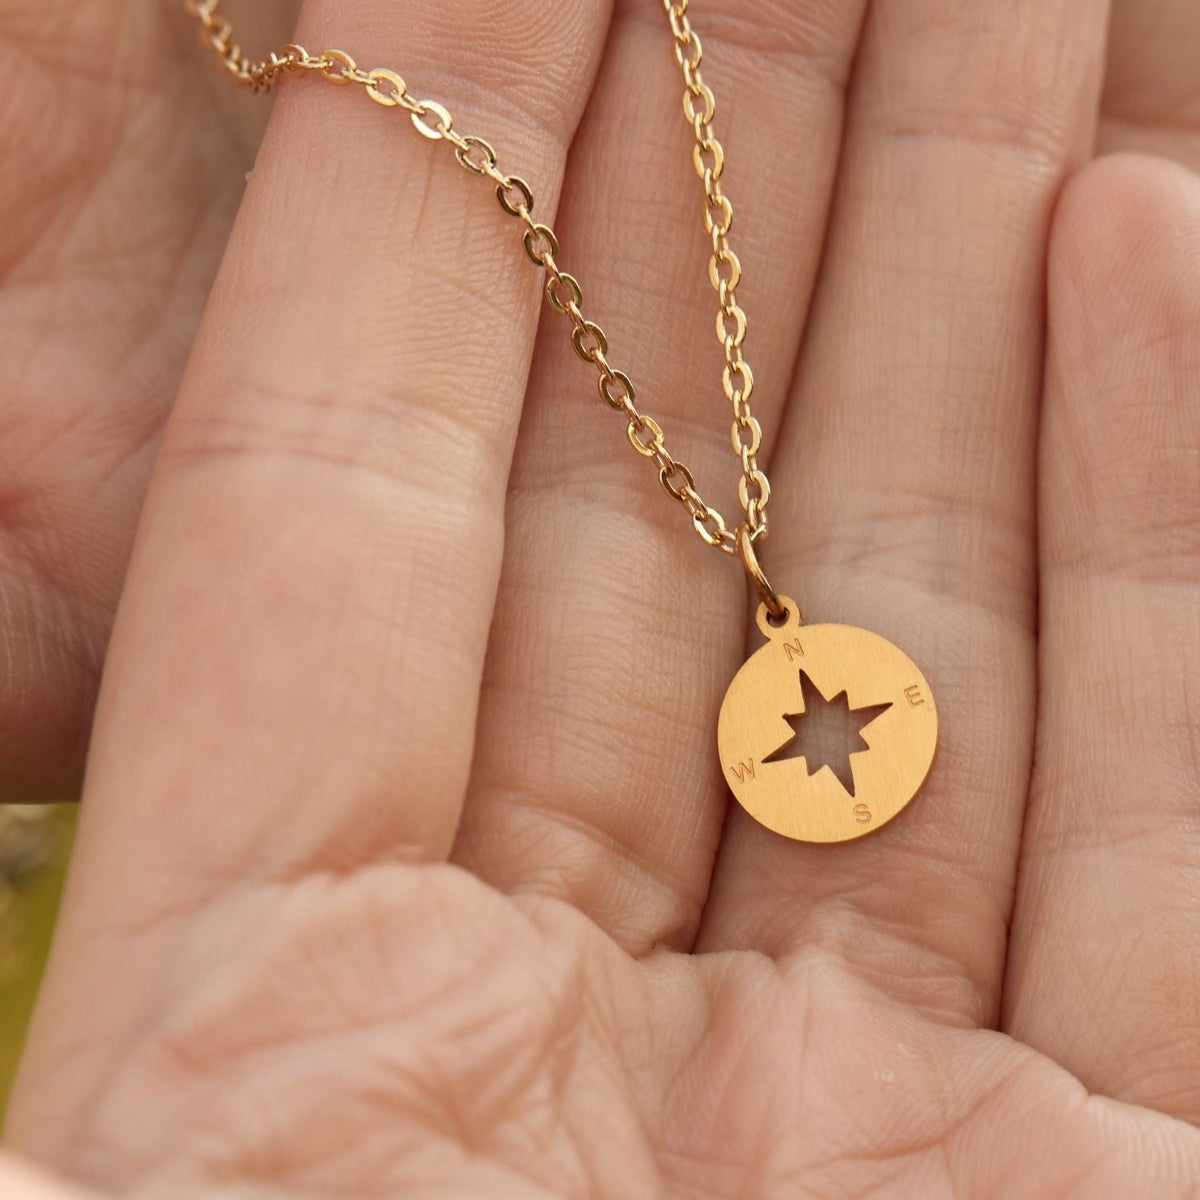 To My Aunt | God&#39;s Power in Your Life | Compass Necklace